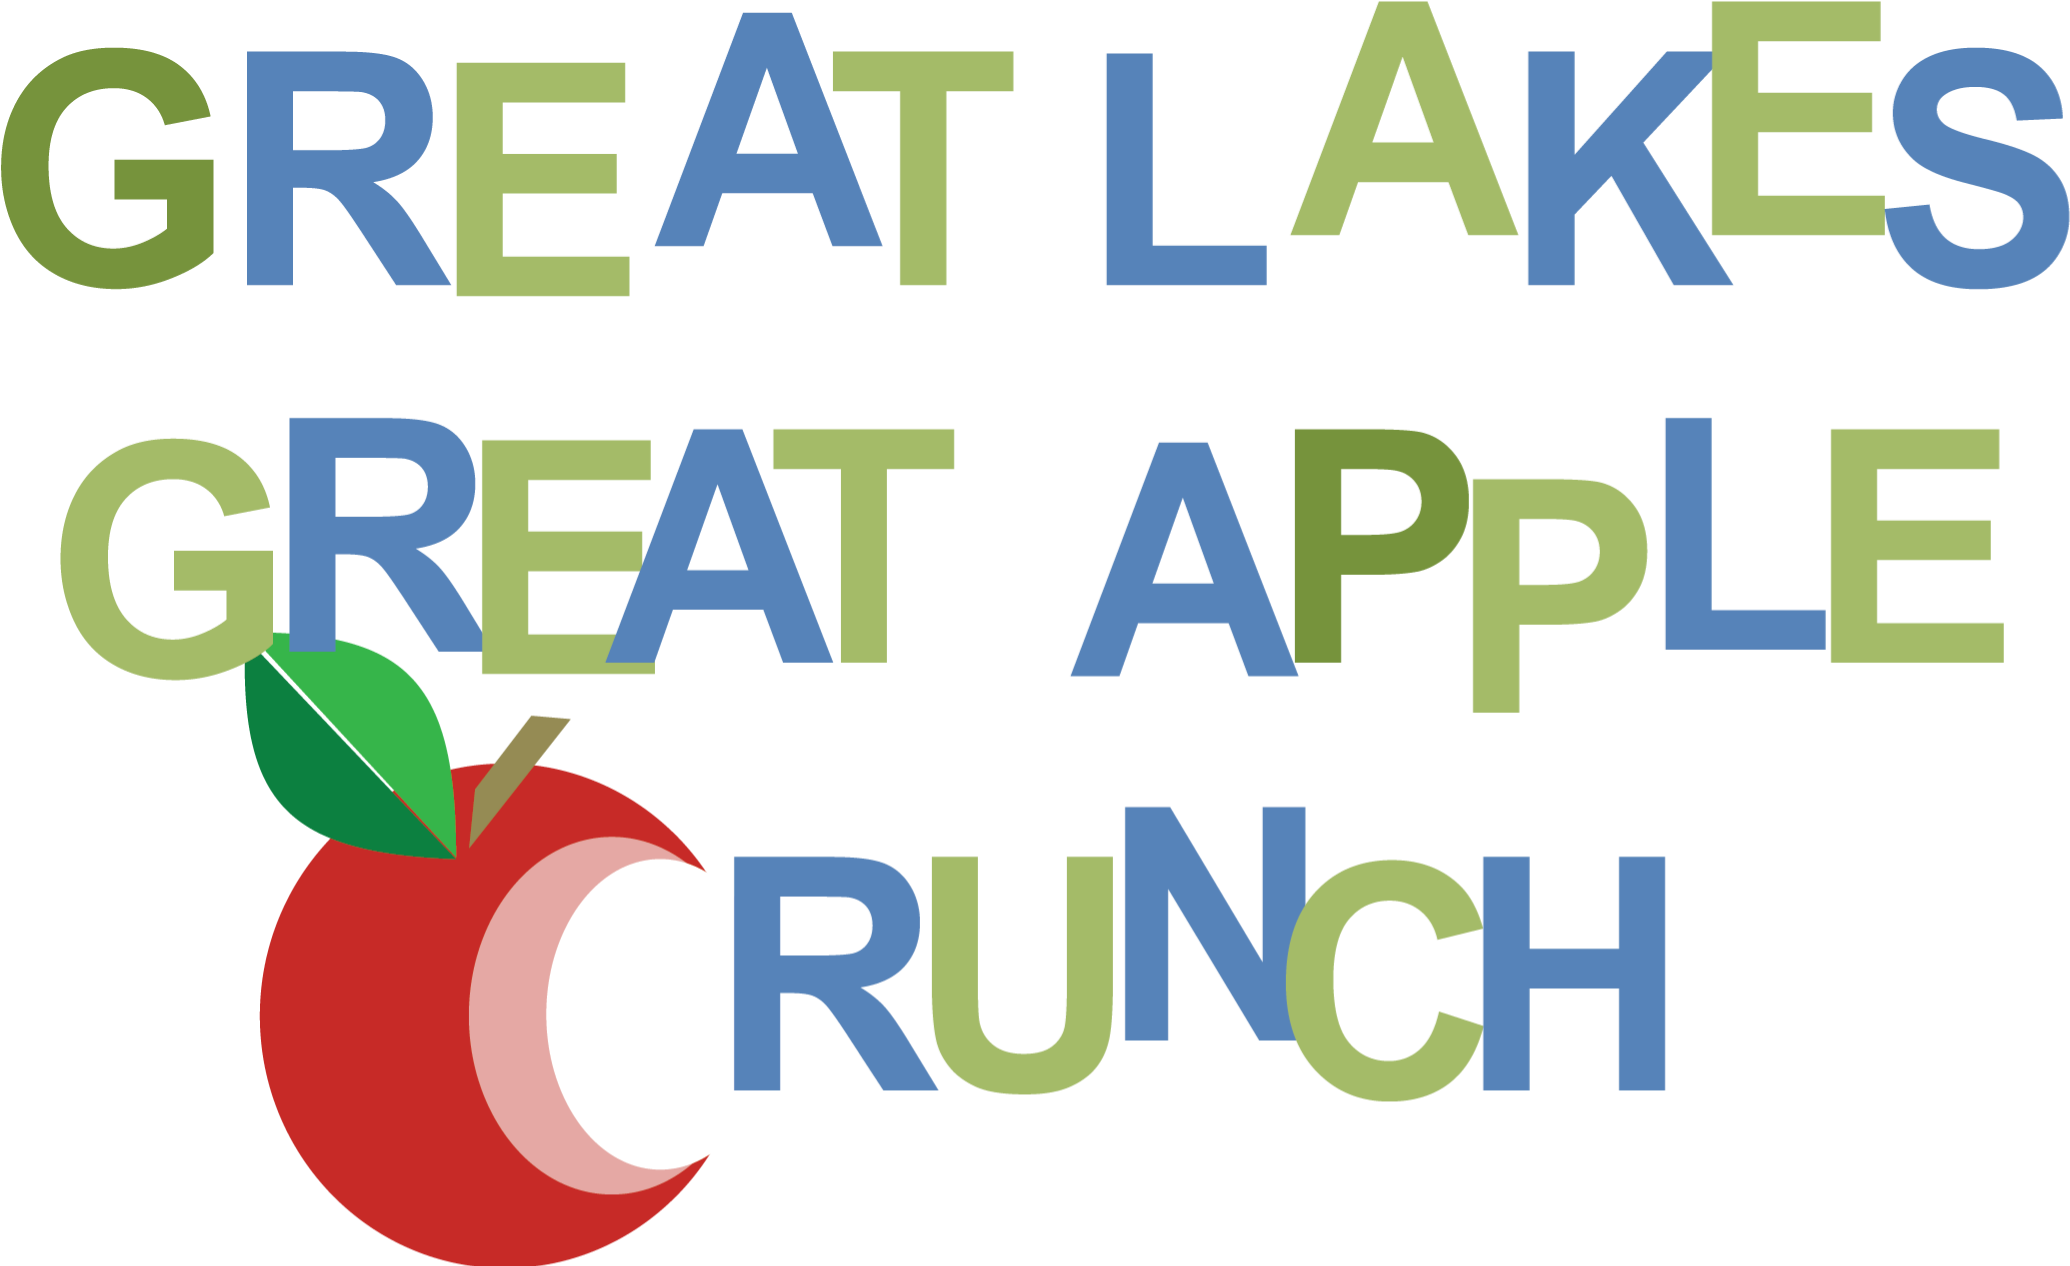 Great Lakes Apple Crunch Event Logo PNG image